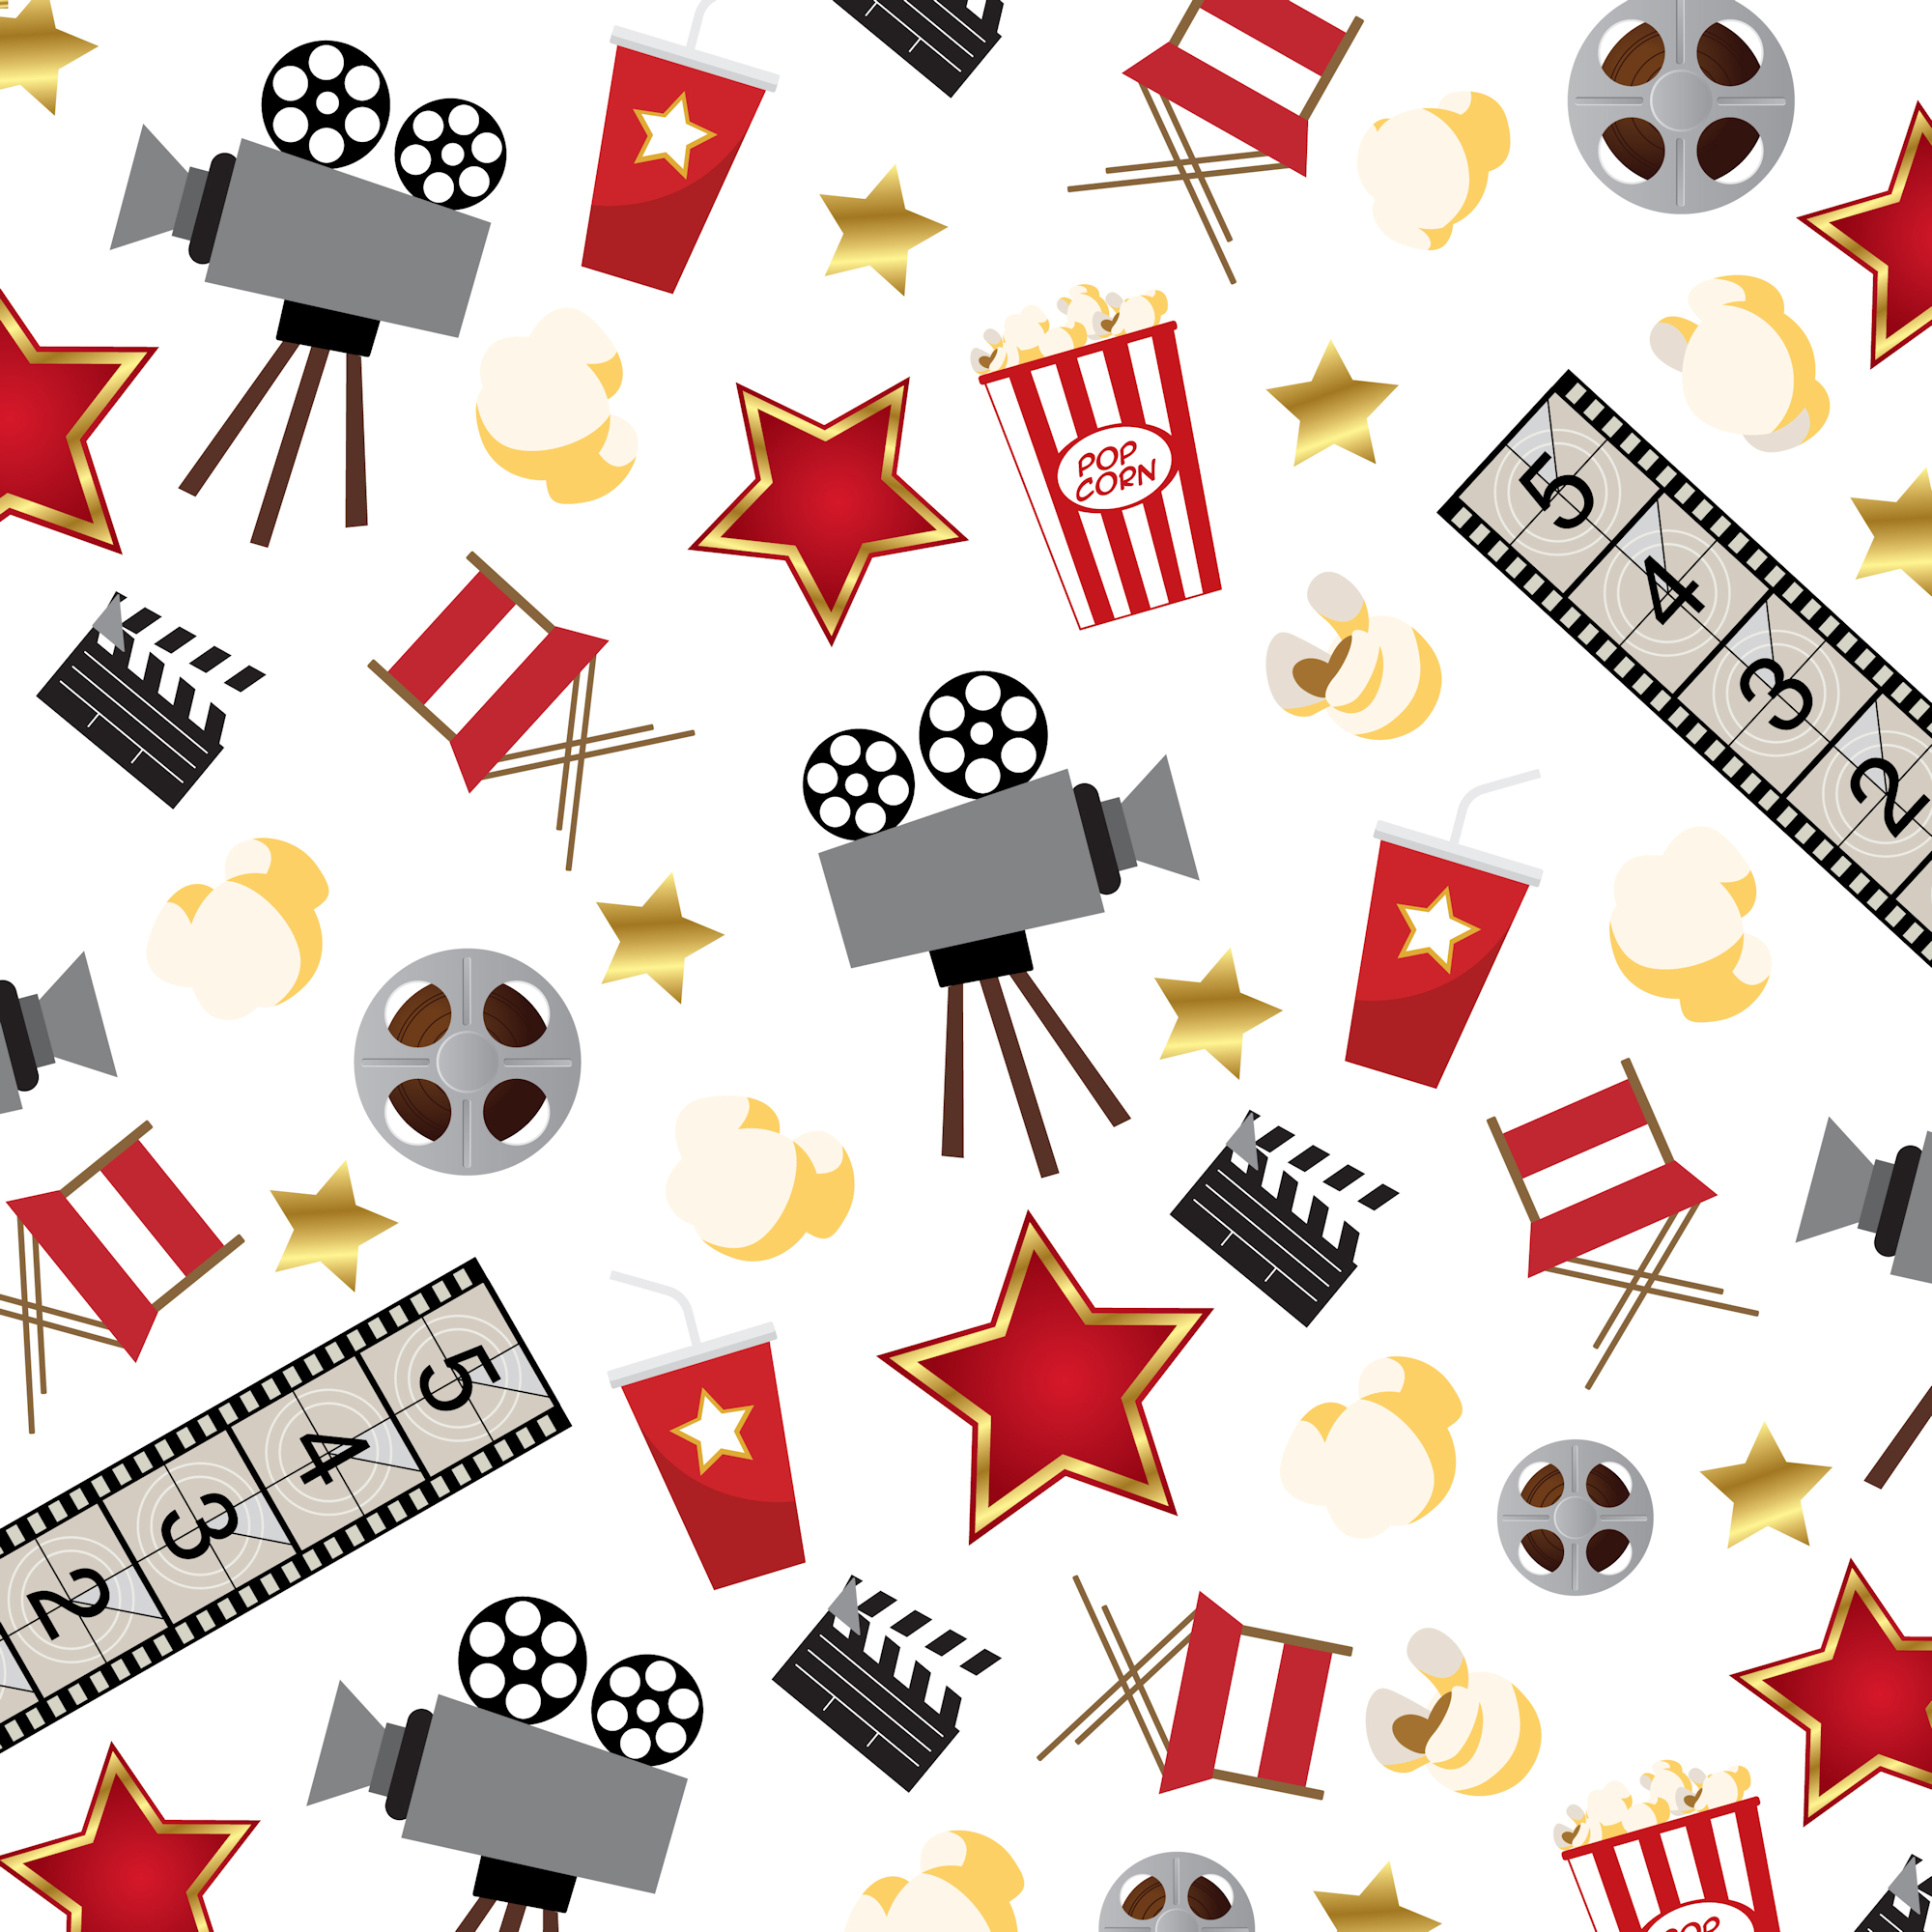 Movie Time Collection Roll The Cameras 12 x 12 Double-Sided Scrapbook Paper by SSC Designs